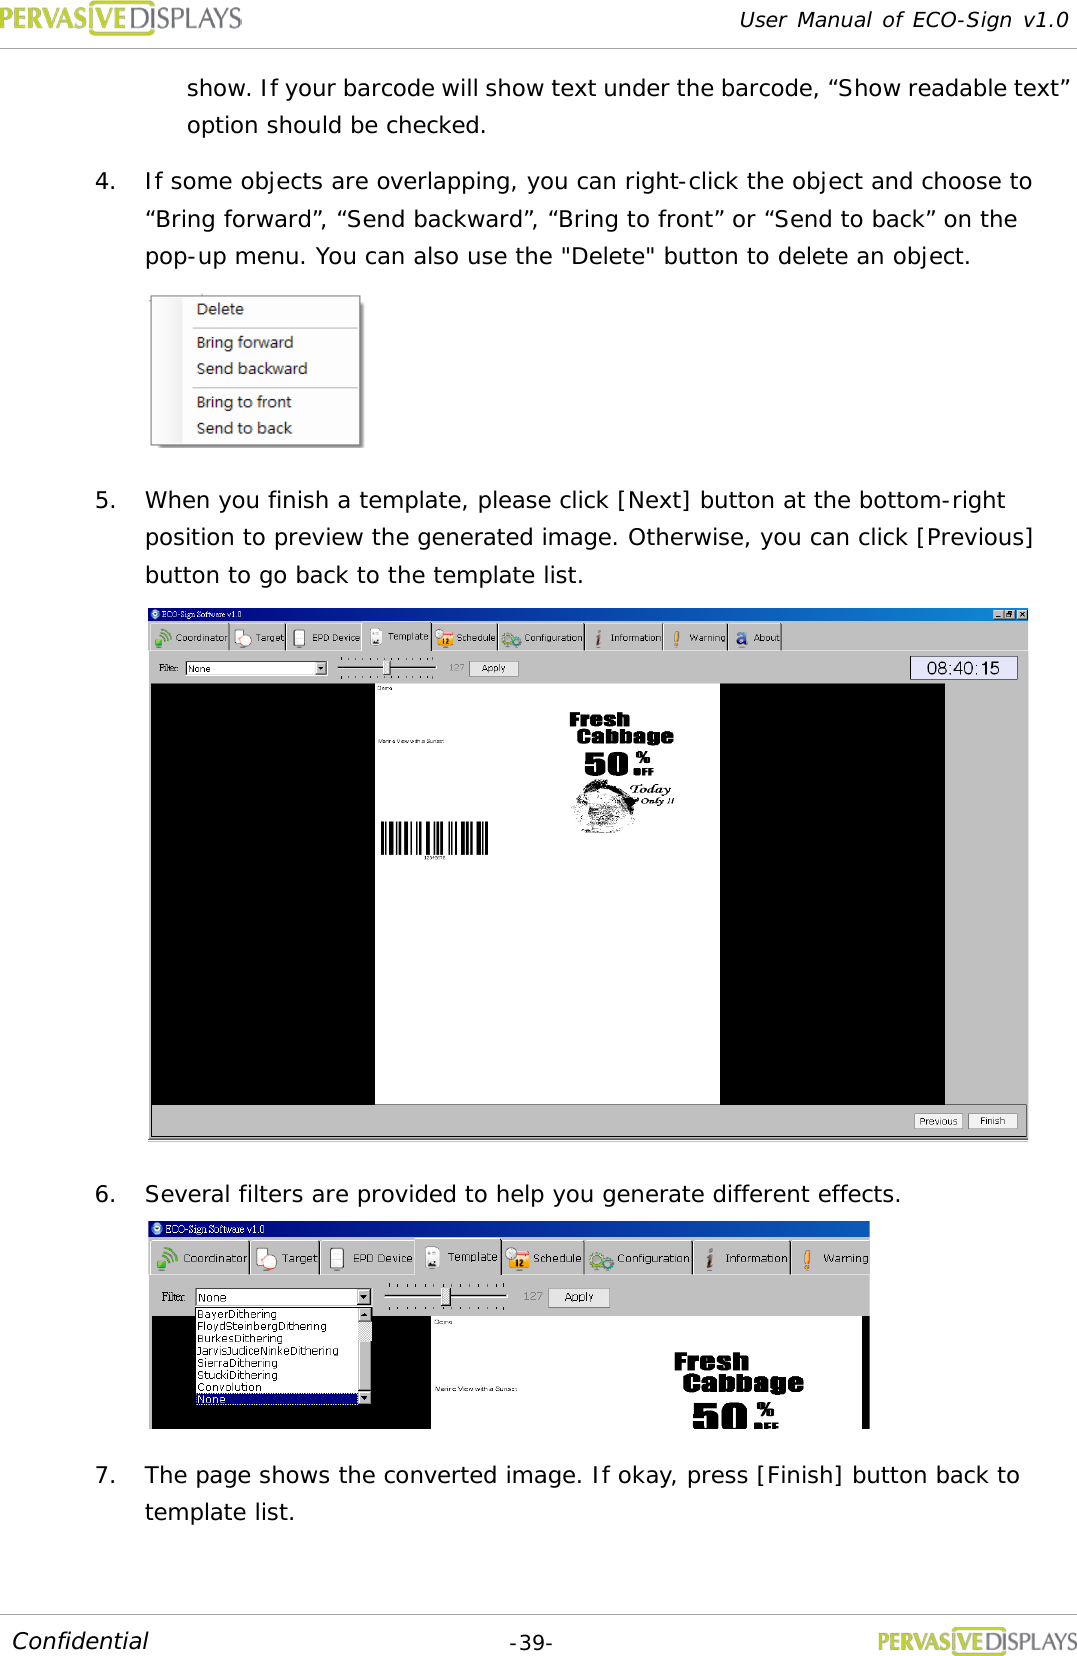 User Manual of ECO-Sign v1.0  -39- Confidential show. If your barcode will show text under the barcode, “Show readable text” option should be checked. 4. If some objects are overlapping, you can right-click the object and choose to “Bring forward”, “Send backward”, “Bring to front” or “Send to back” on the pop-up menu. You can also use the &quot;Delete&quot; button to delete an object.  5. When you finish a template, please click [Next] button at the bottom-right position to preview the generated image. Otherwise, you can click [Previous] button to go back to the template list.   6. Several filters are provided to help you generate different effects.  7. The page shows the converted image. If okay, press [Finish] button back to template list.   